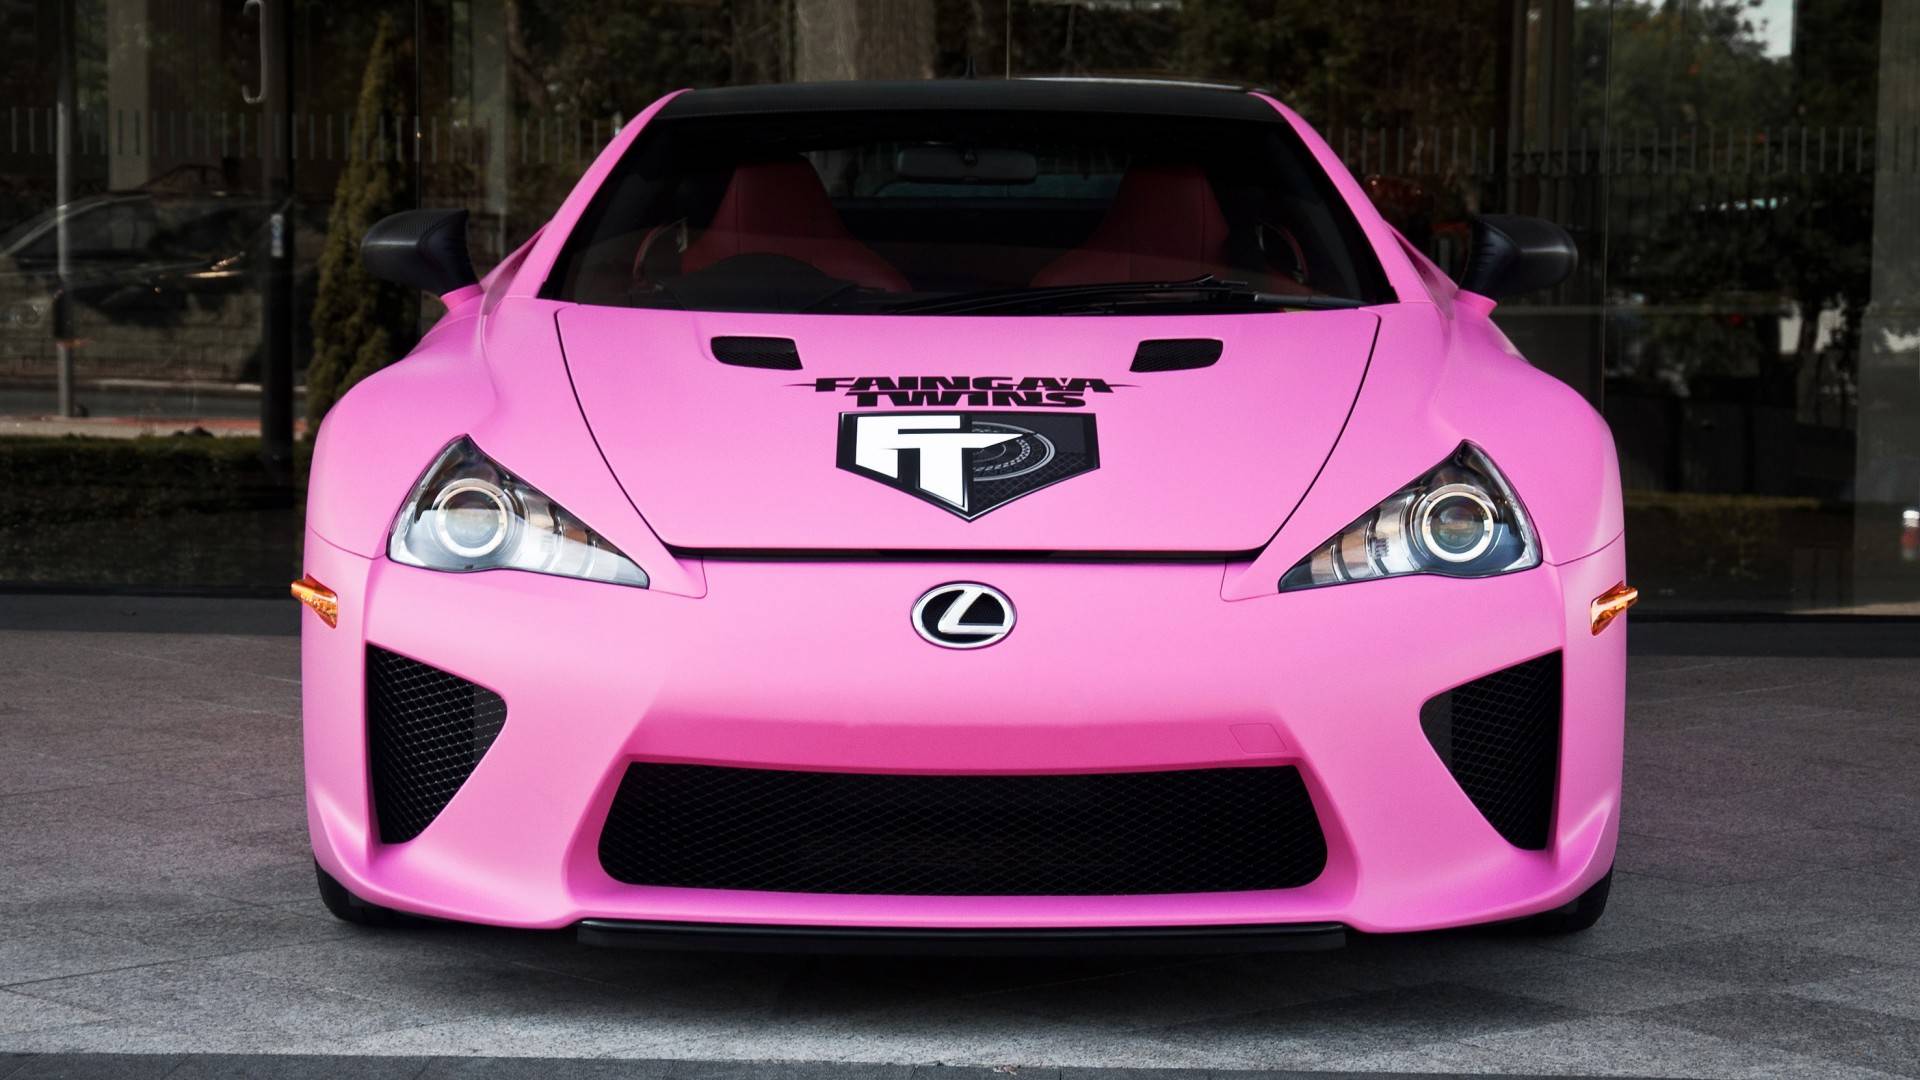 Pink Car Wallpaper Android Application